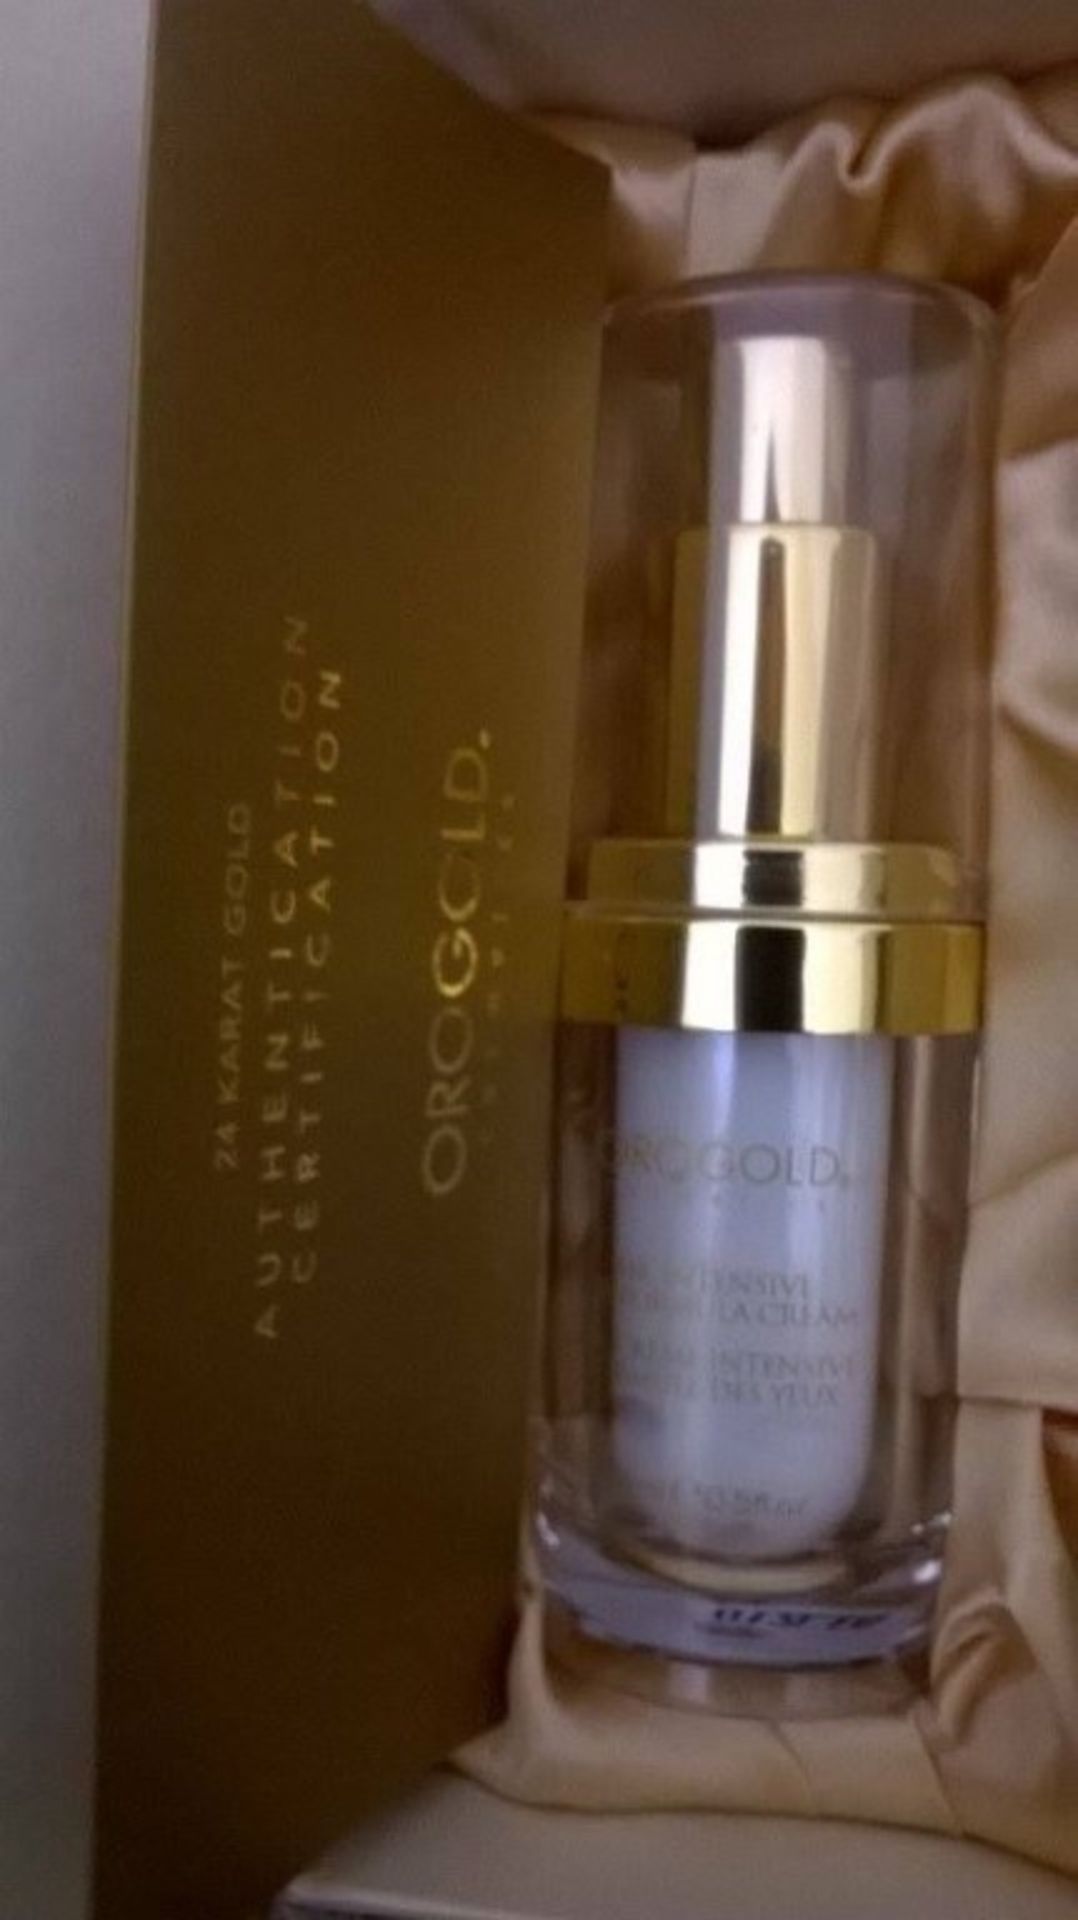 1 x Orogold 24K Intense Eye Formula Cream 15g - Reduces the Appearance of Dark Circles Around the - Image 4 of 4